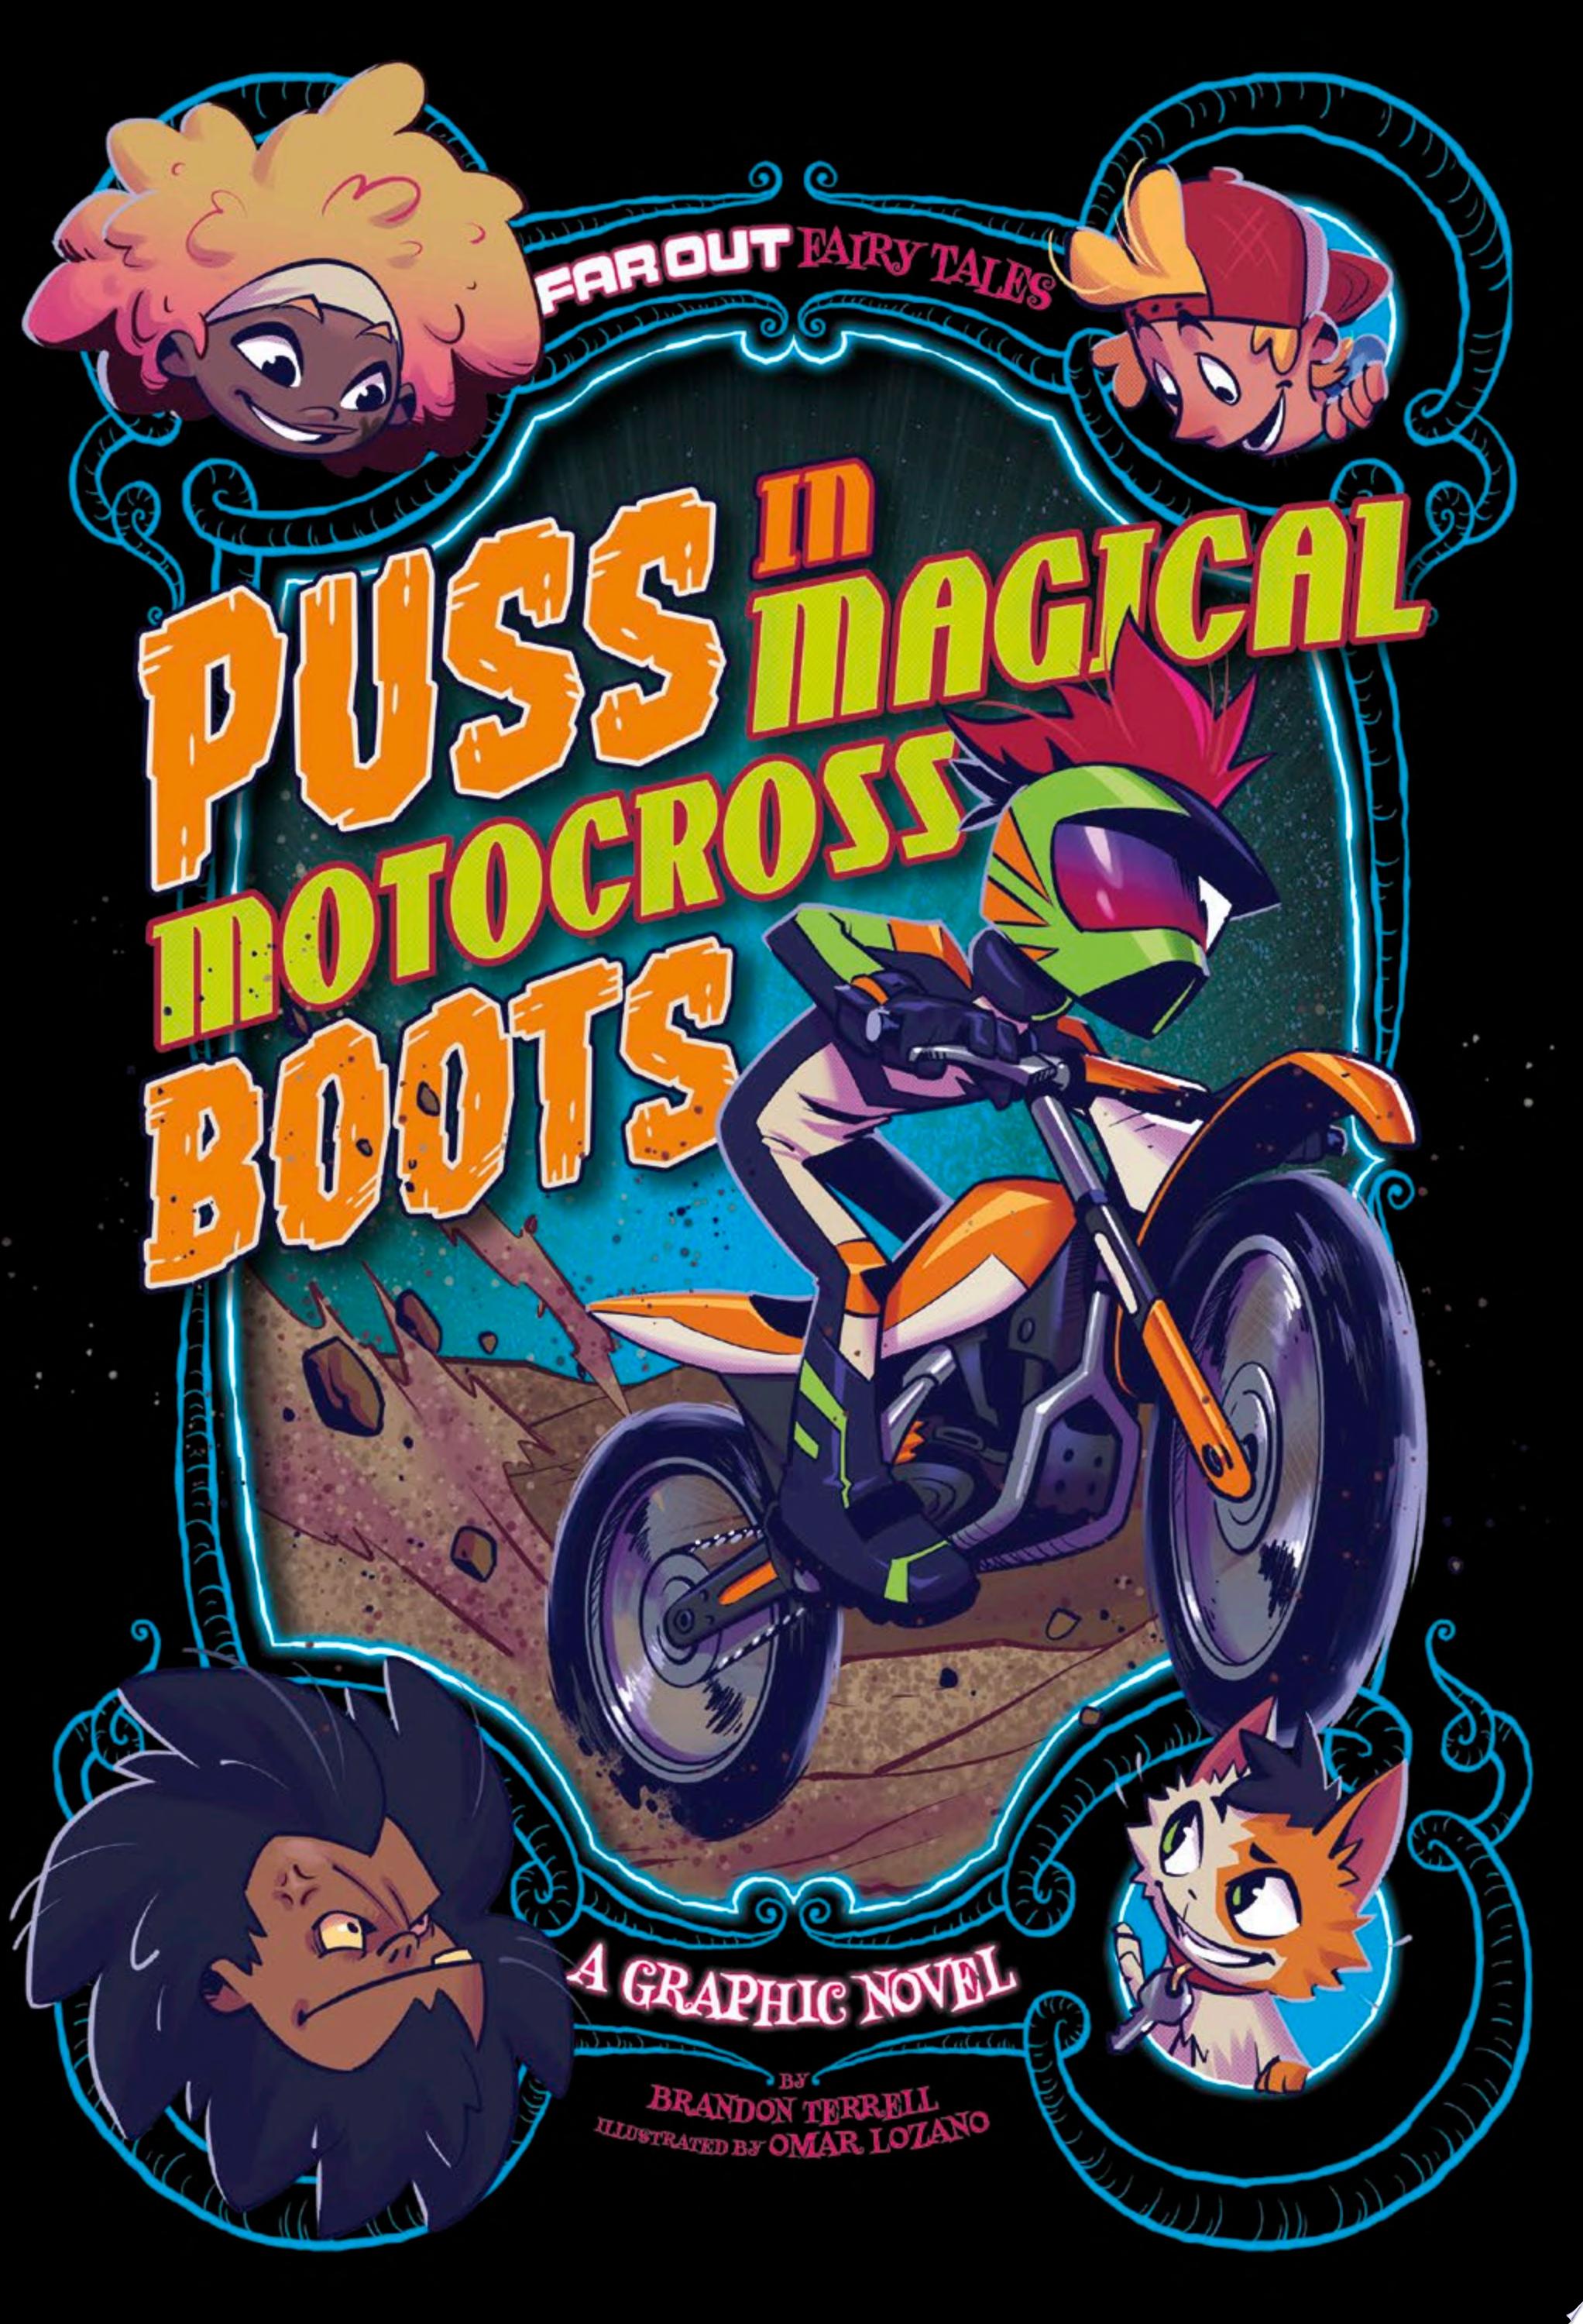 Image for "Puss in Magical Motocross Boots"